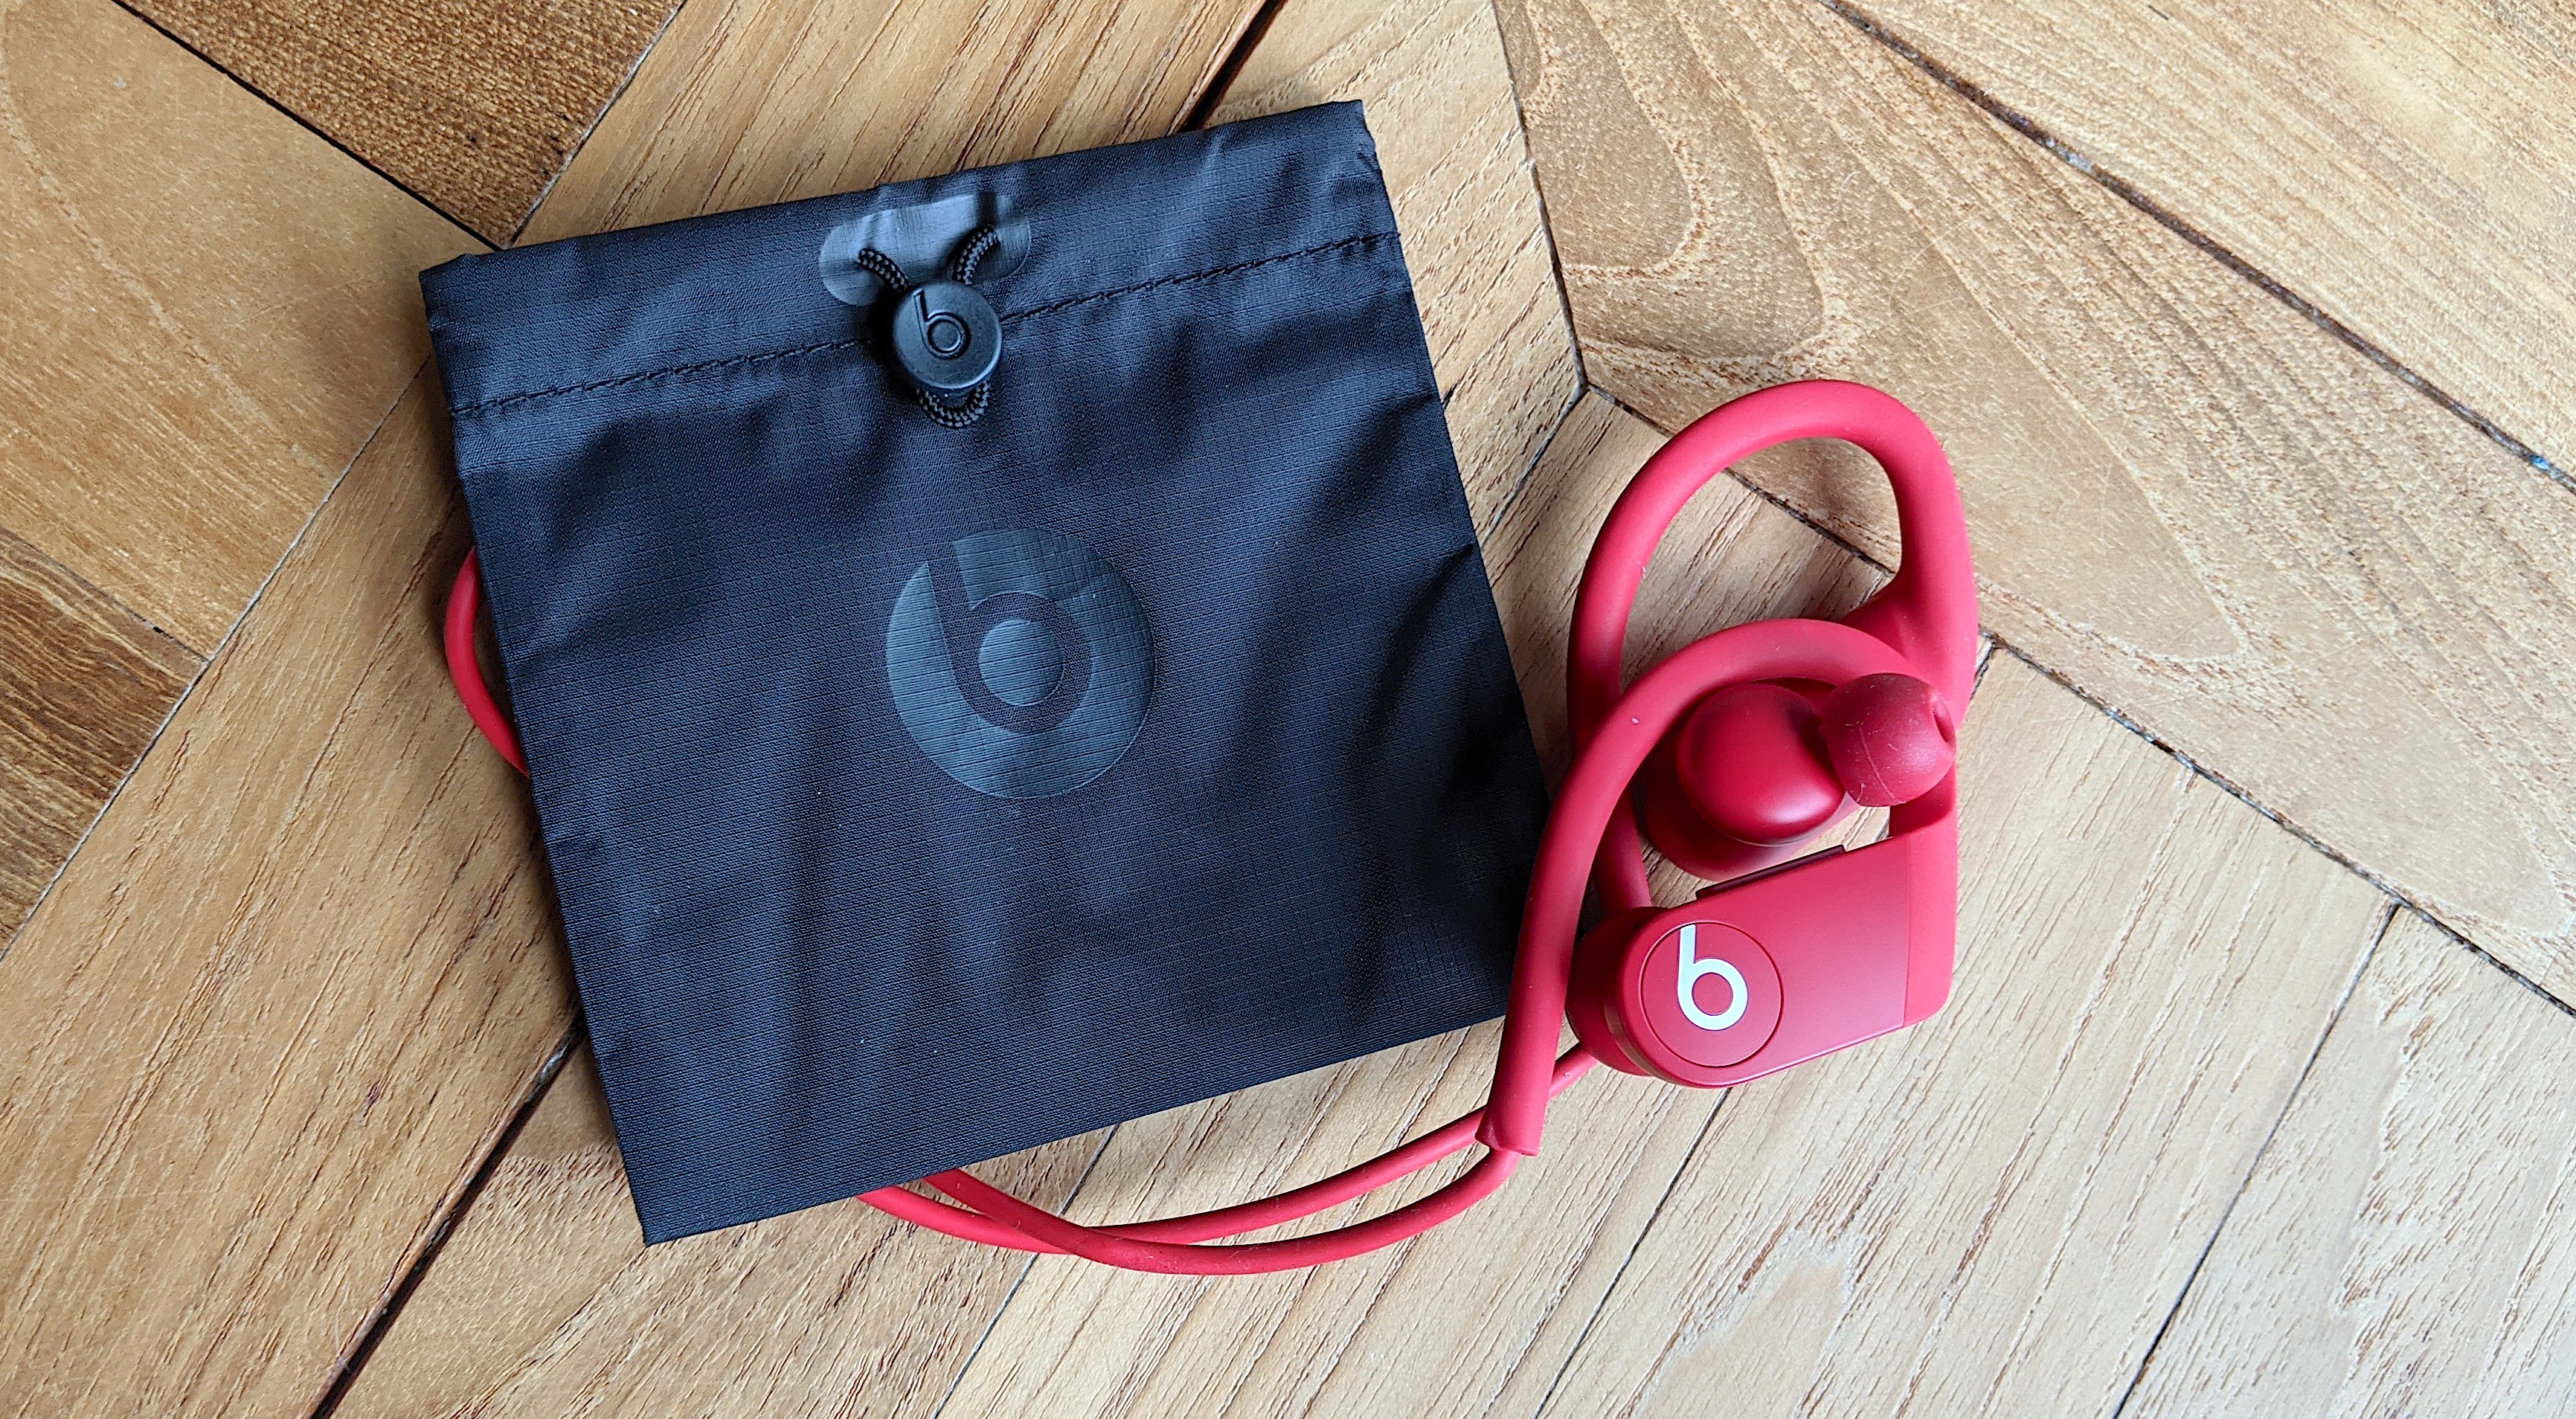 The Beats Powerbeats 4 and carrying pouch